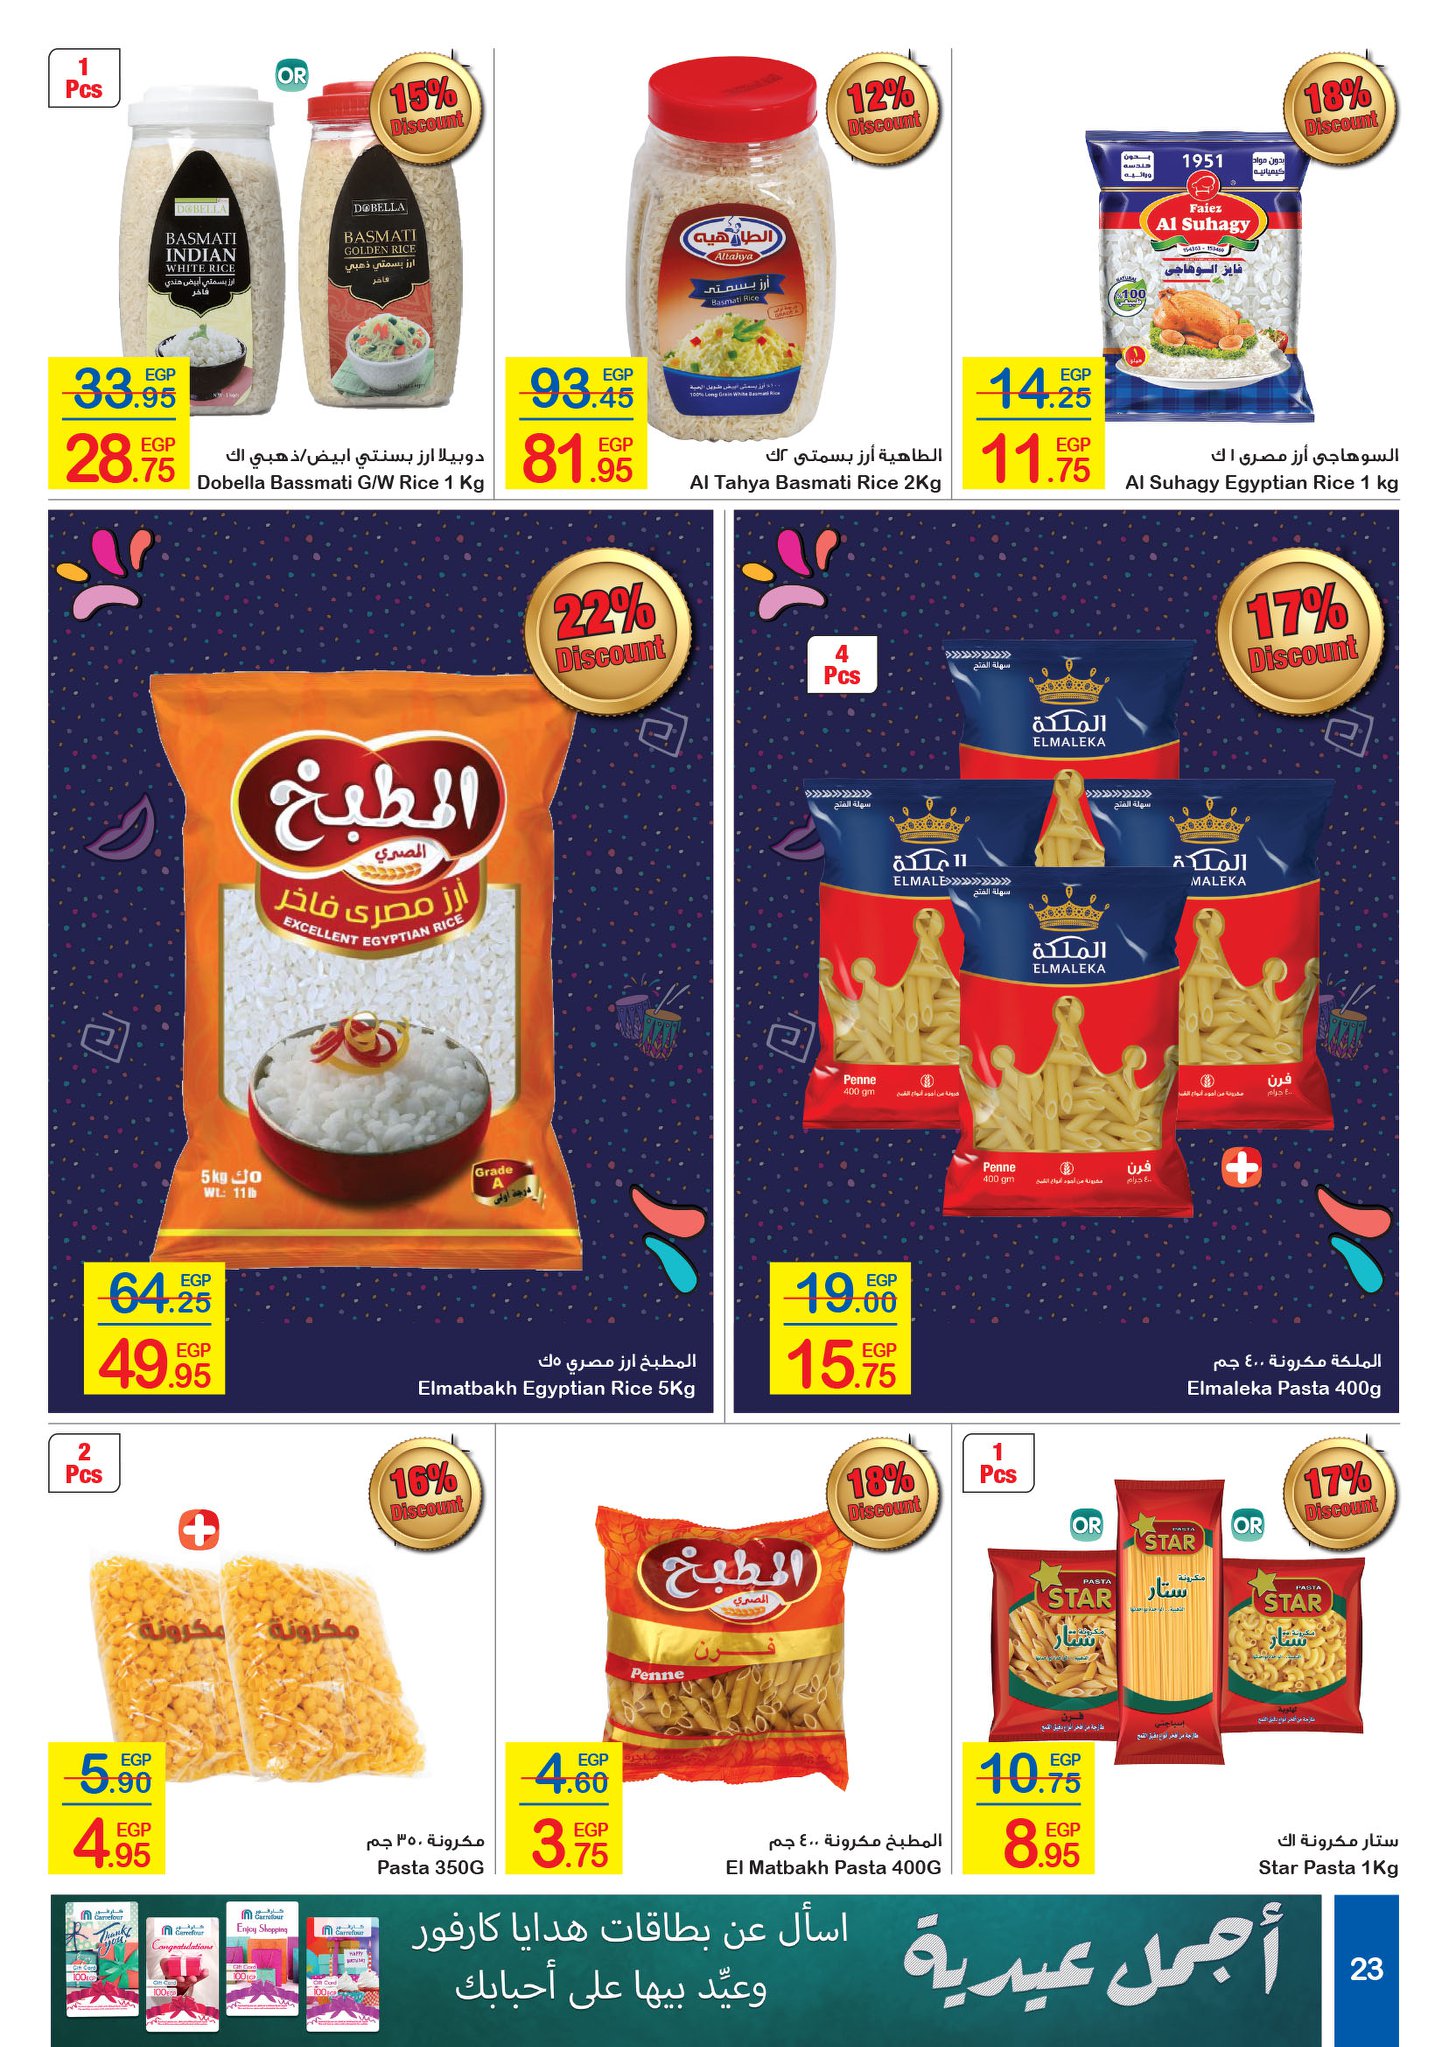 Carrefour Flyer from 16/7 till 27/7 | Carrefour Egypt 23